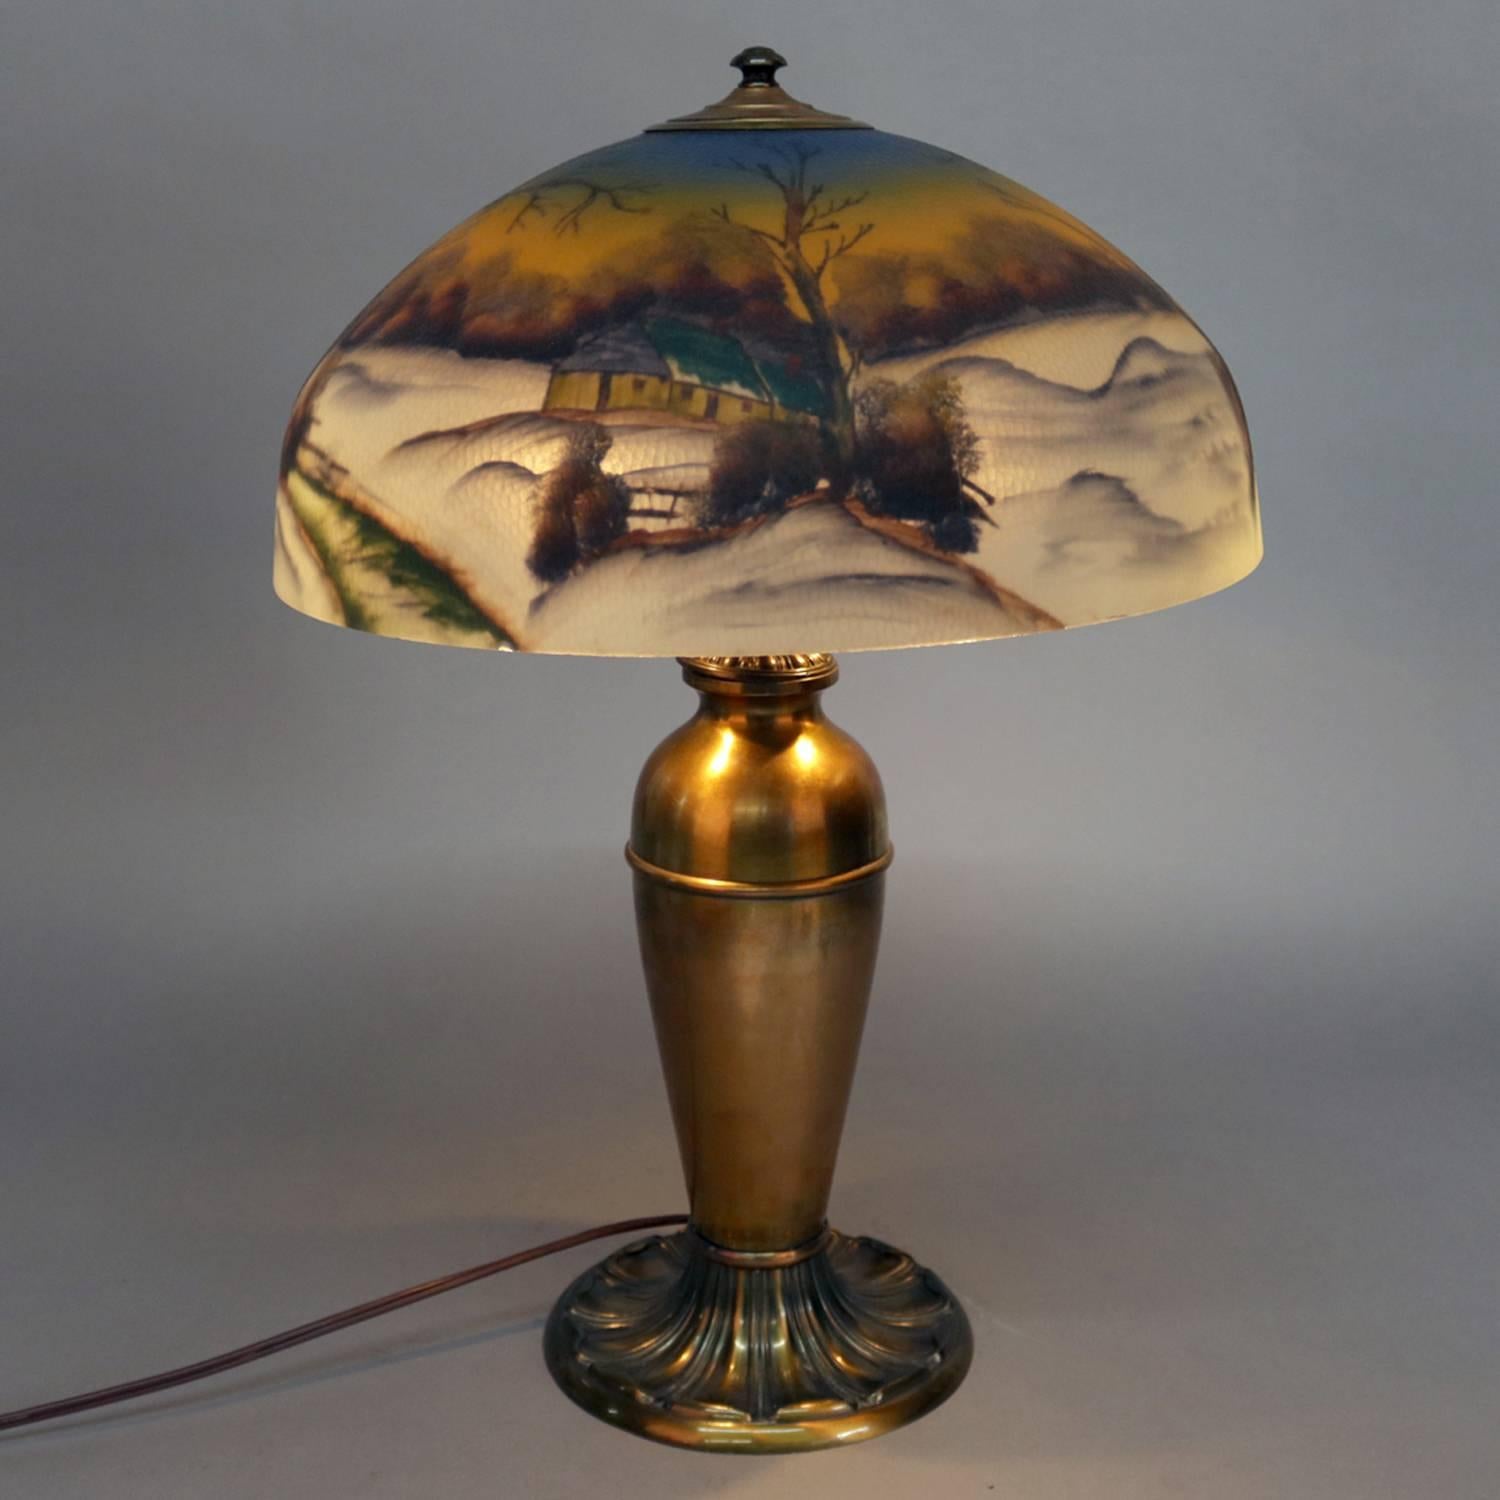 Antique Handel School table lamp features Pittsburgh style reverse painted glass dome shade with winter landscape scene with snow and cabin, cast amphora form brass base, dual pull chain lights, circa 1920

Measures: 24